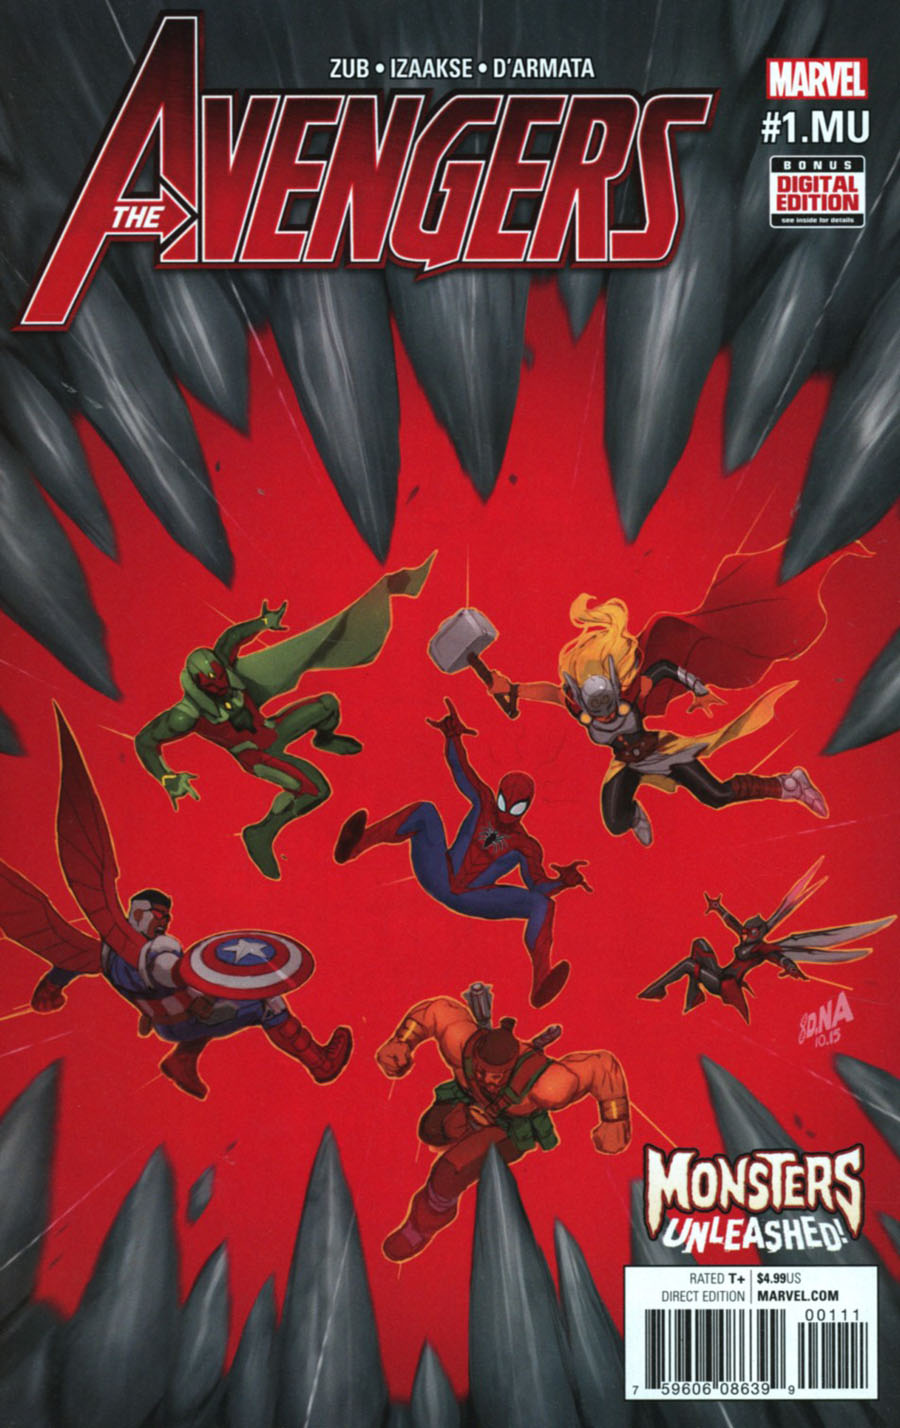 Avengers Vol 6 #1.MU Cover A Regular David Nakayama Cover (Monsters Unleashed Tie-In)